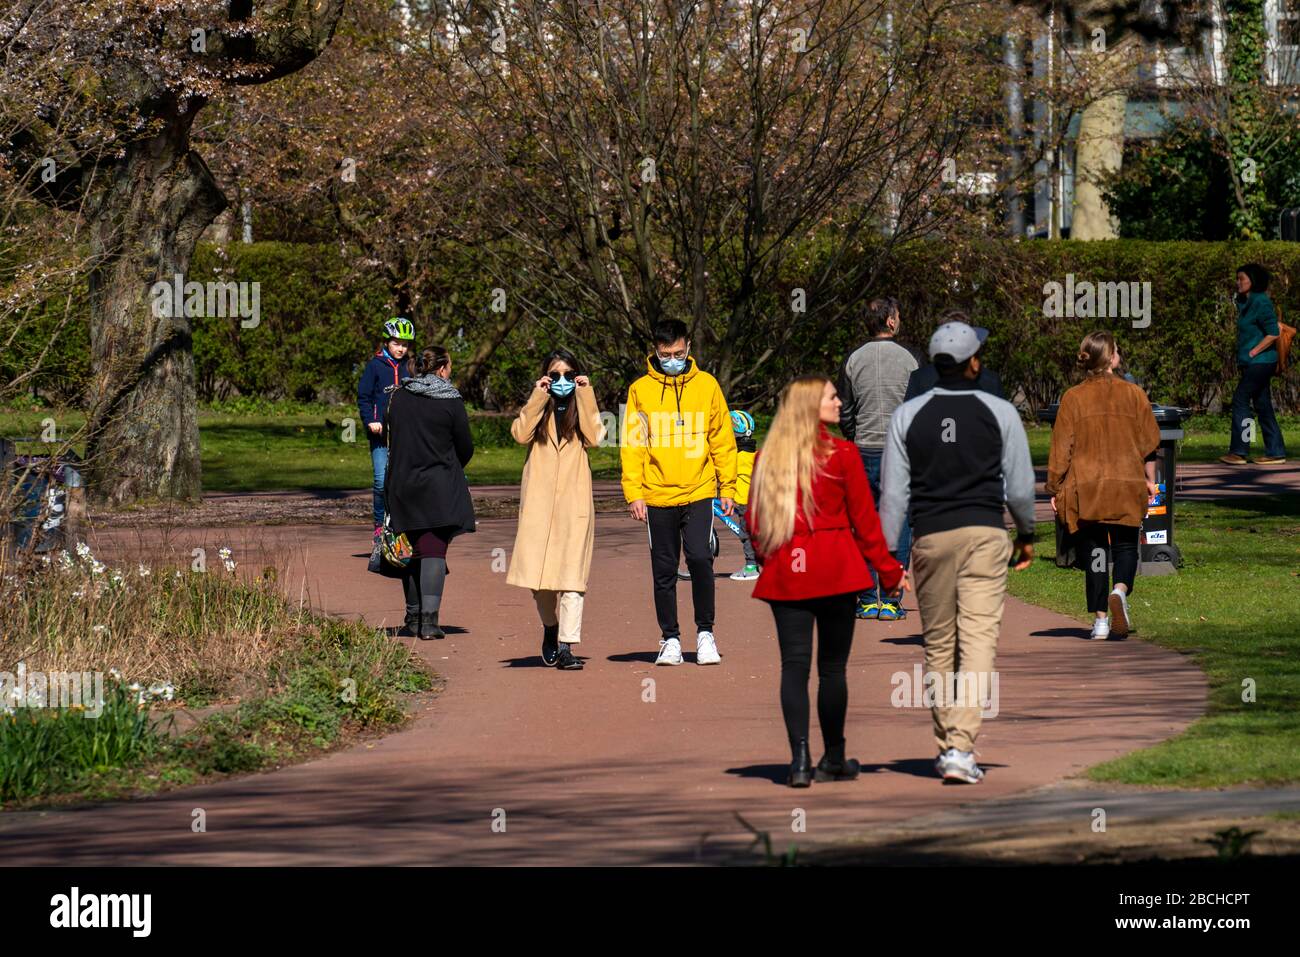 The Stadtgarten in downtown Essen, city park, Saturday, 04.04.20, people respect the ban on contact, keep their distance, not many visitors despite su Stock Photo